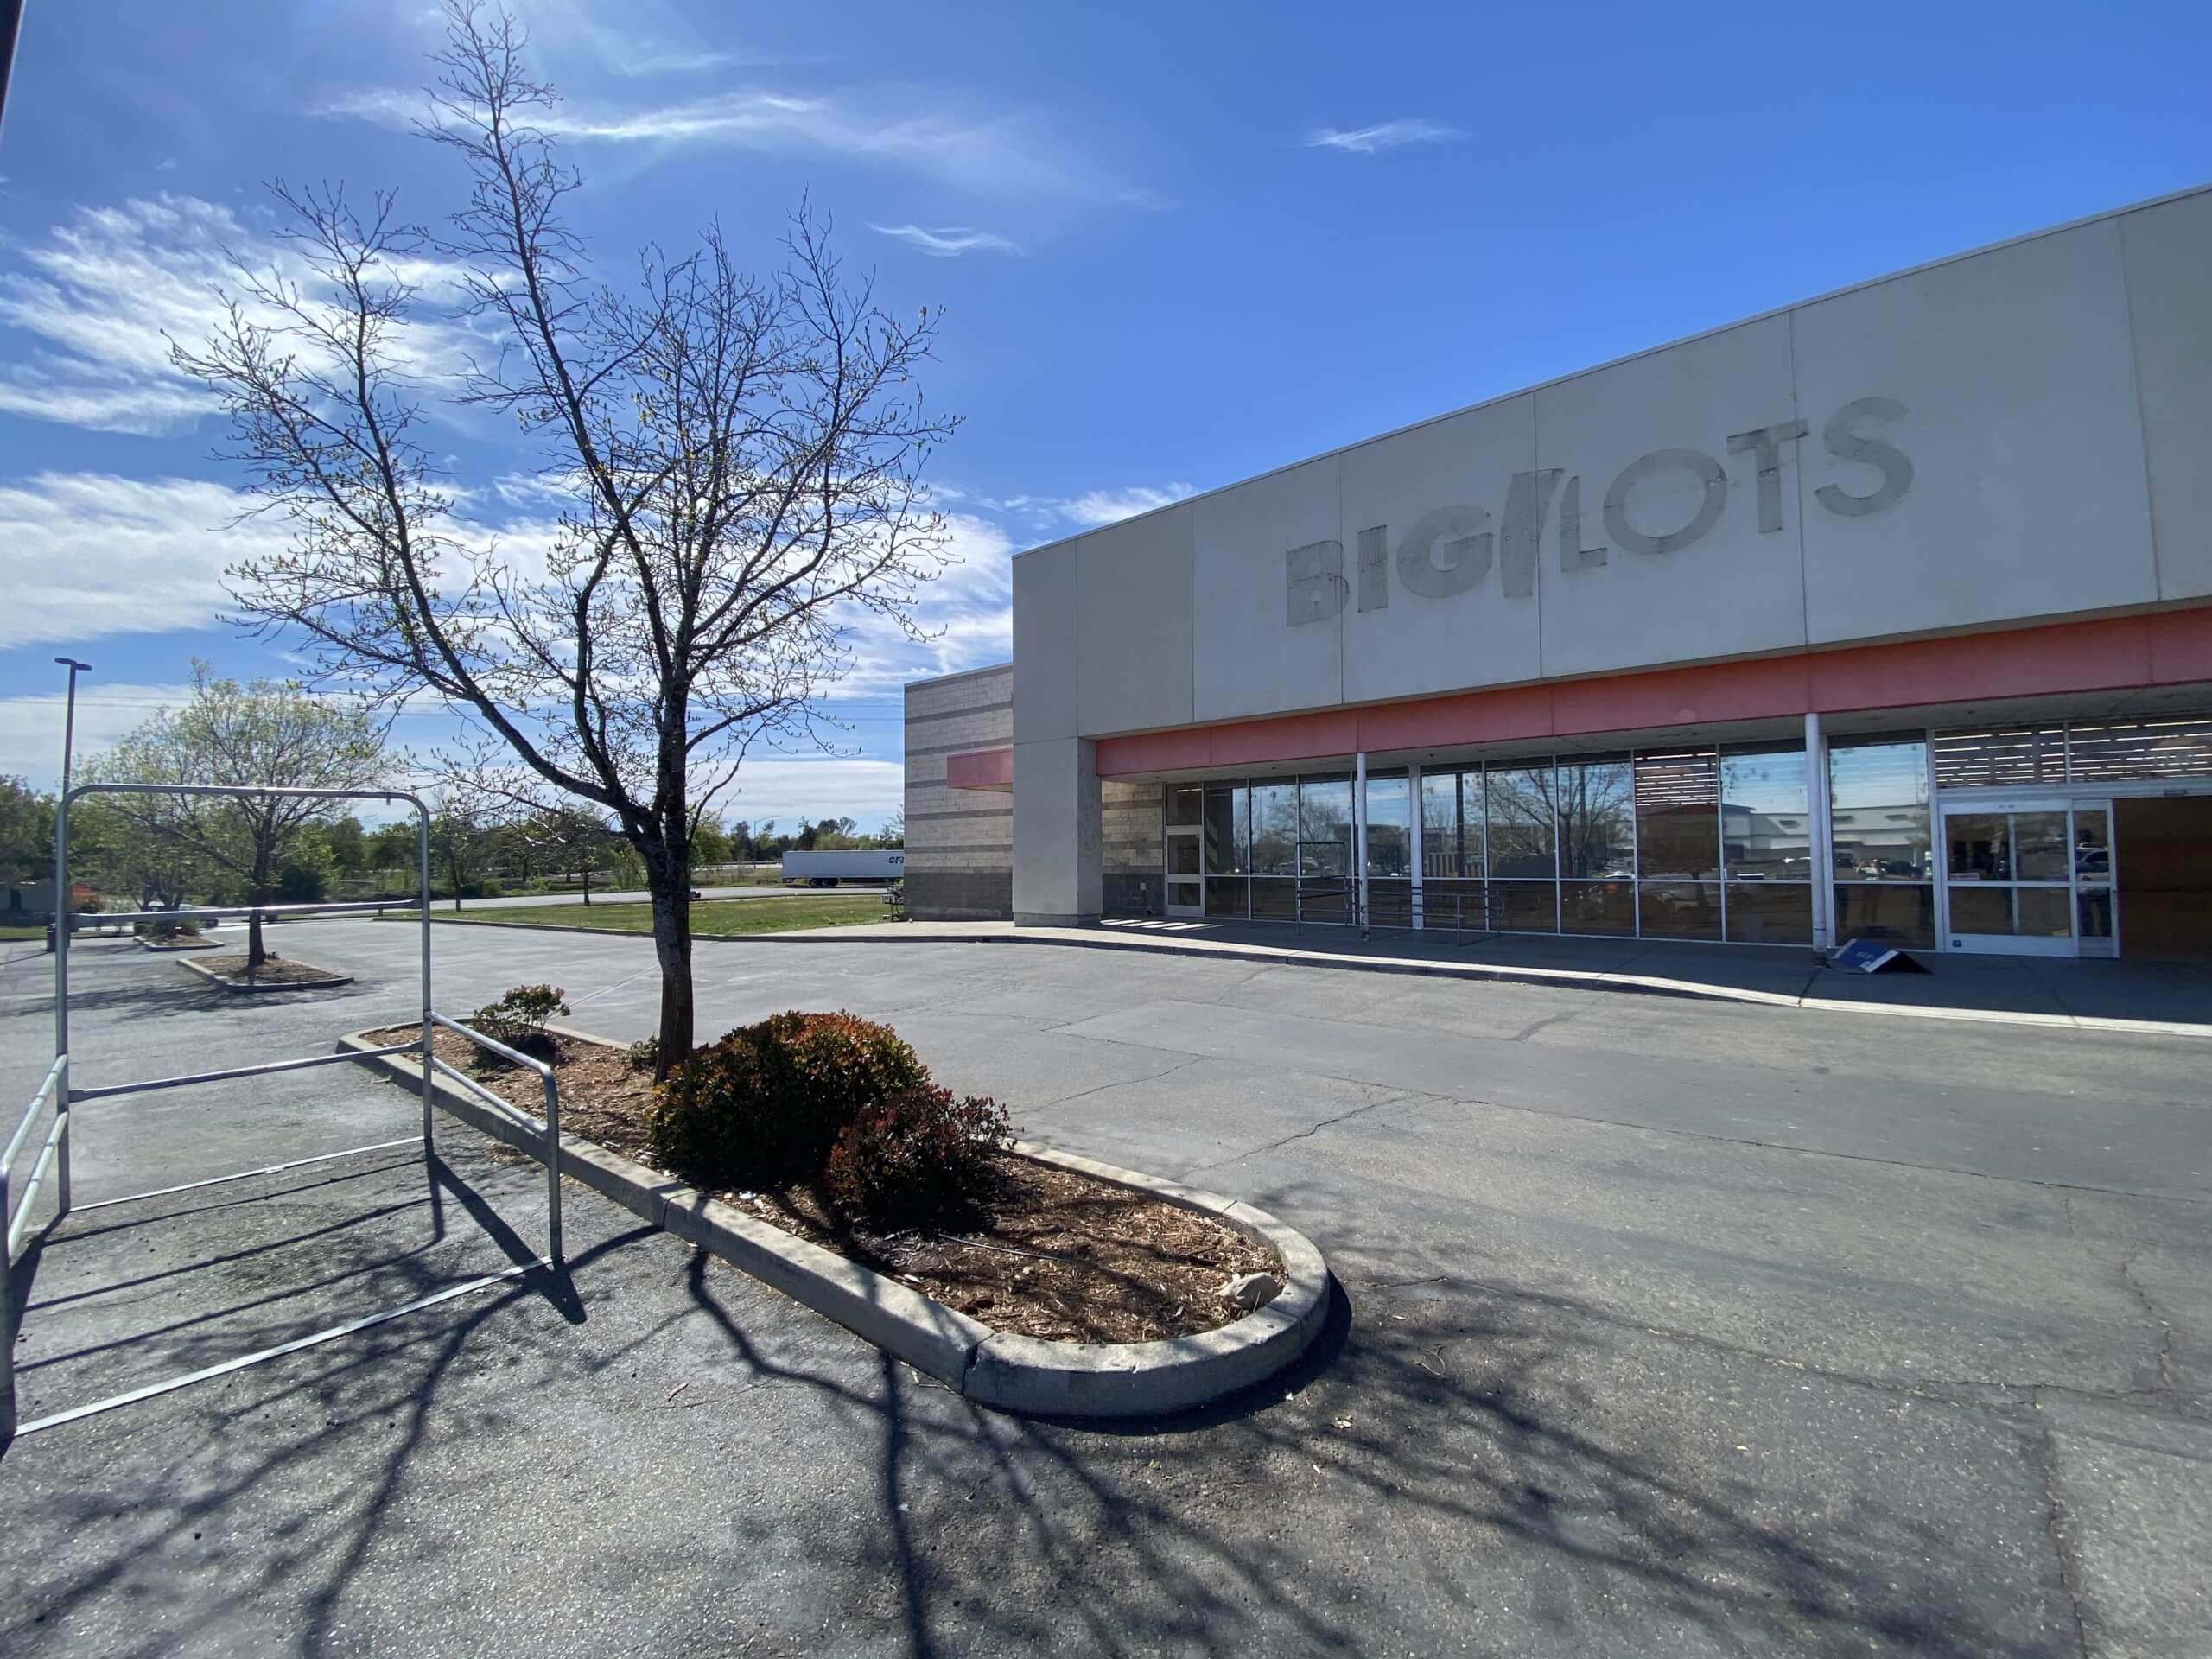 Big Lots Building and an empty parking lot